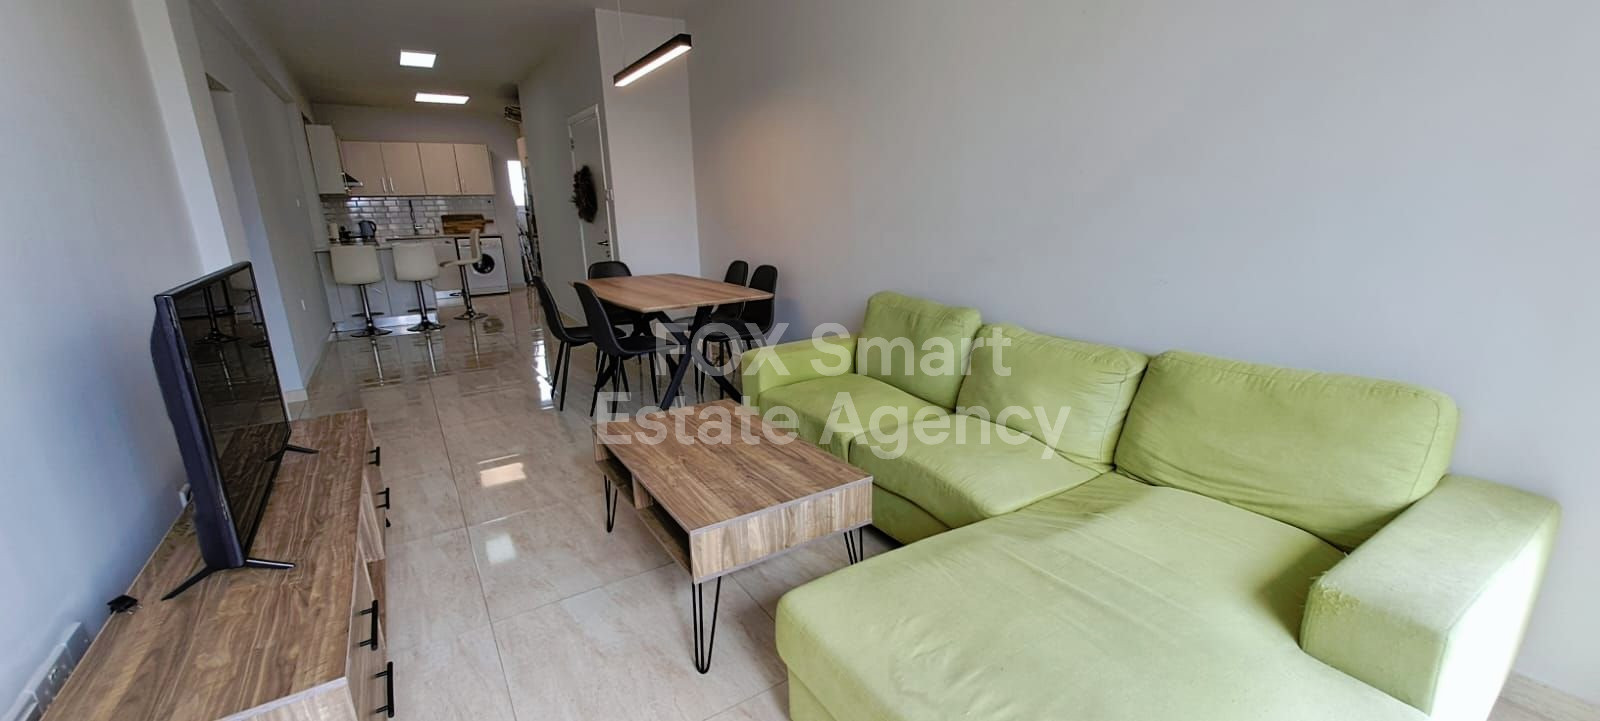 Apartment, For Sale, Limassol  3 Bedrooms 3 Bathrooms 